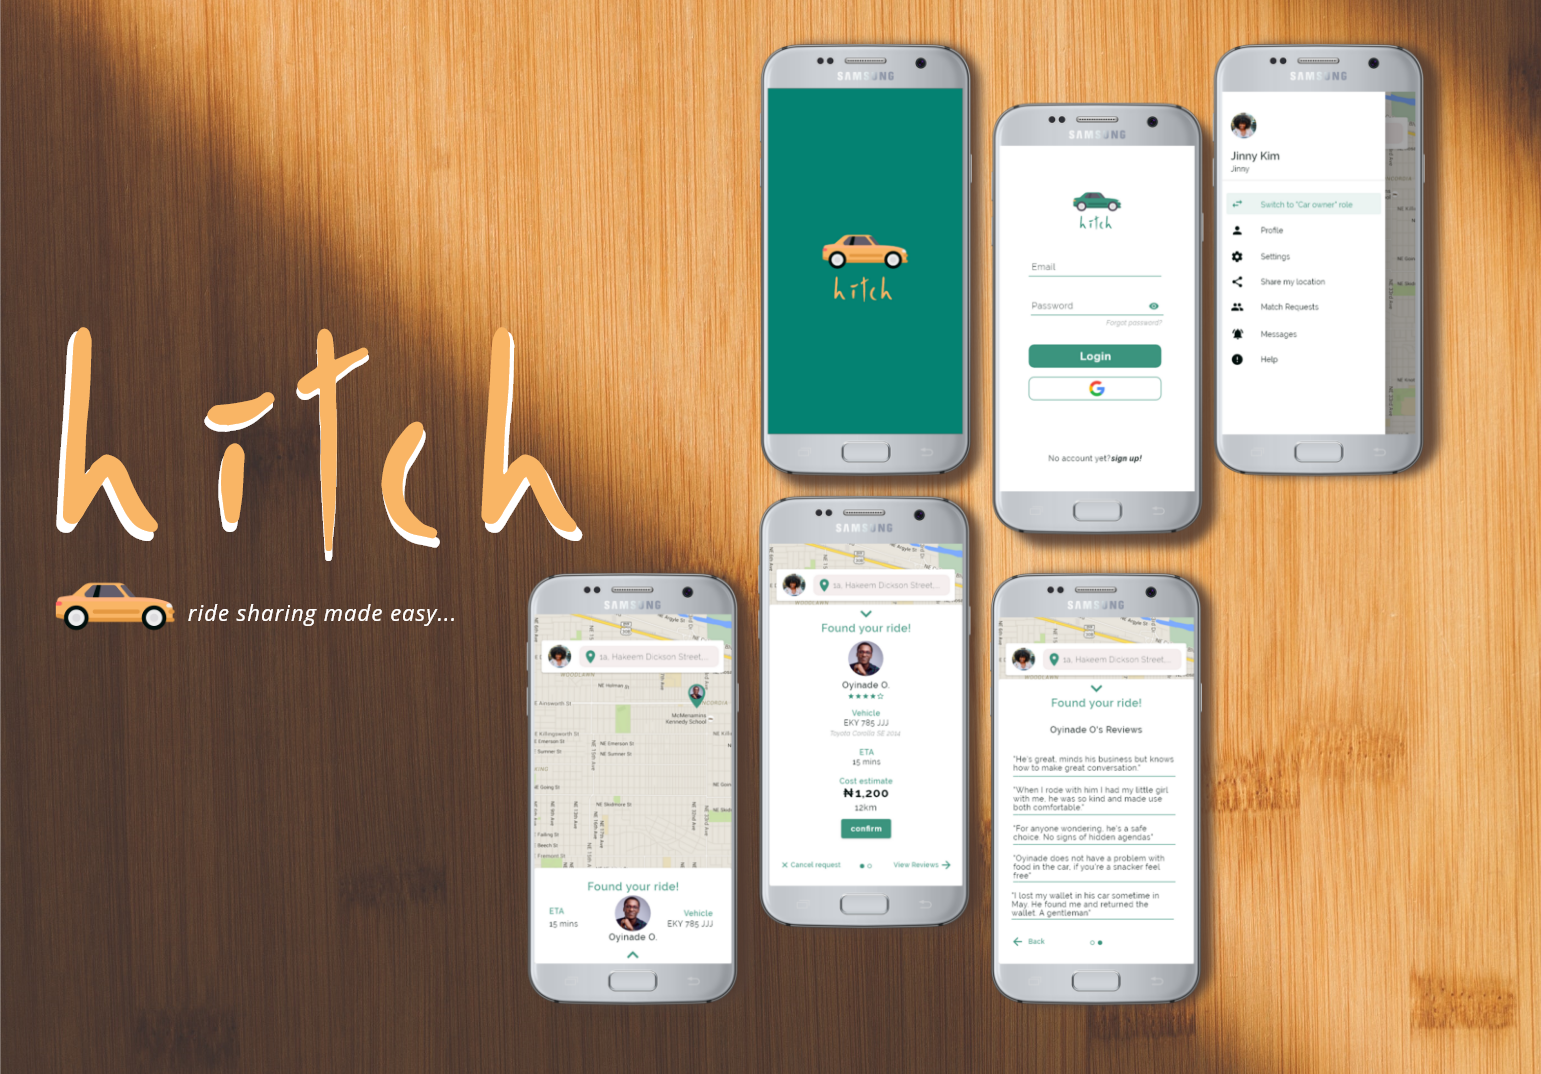 image of the hitch app screens